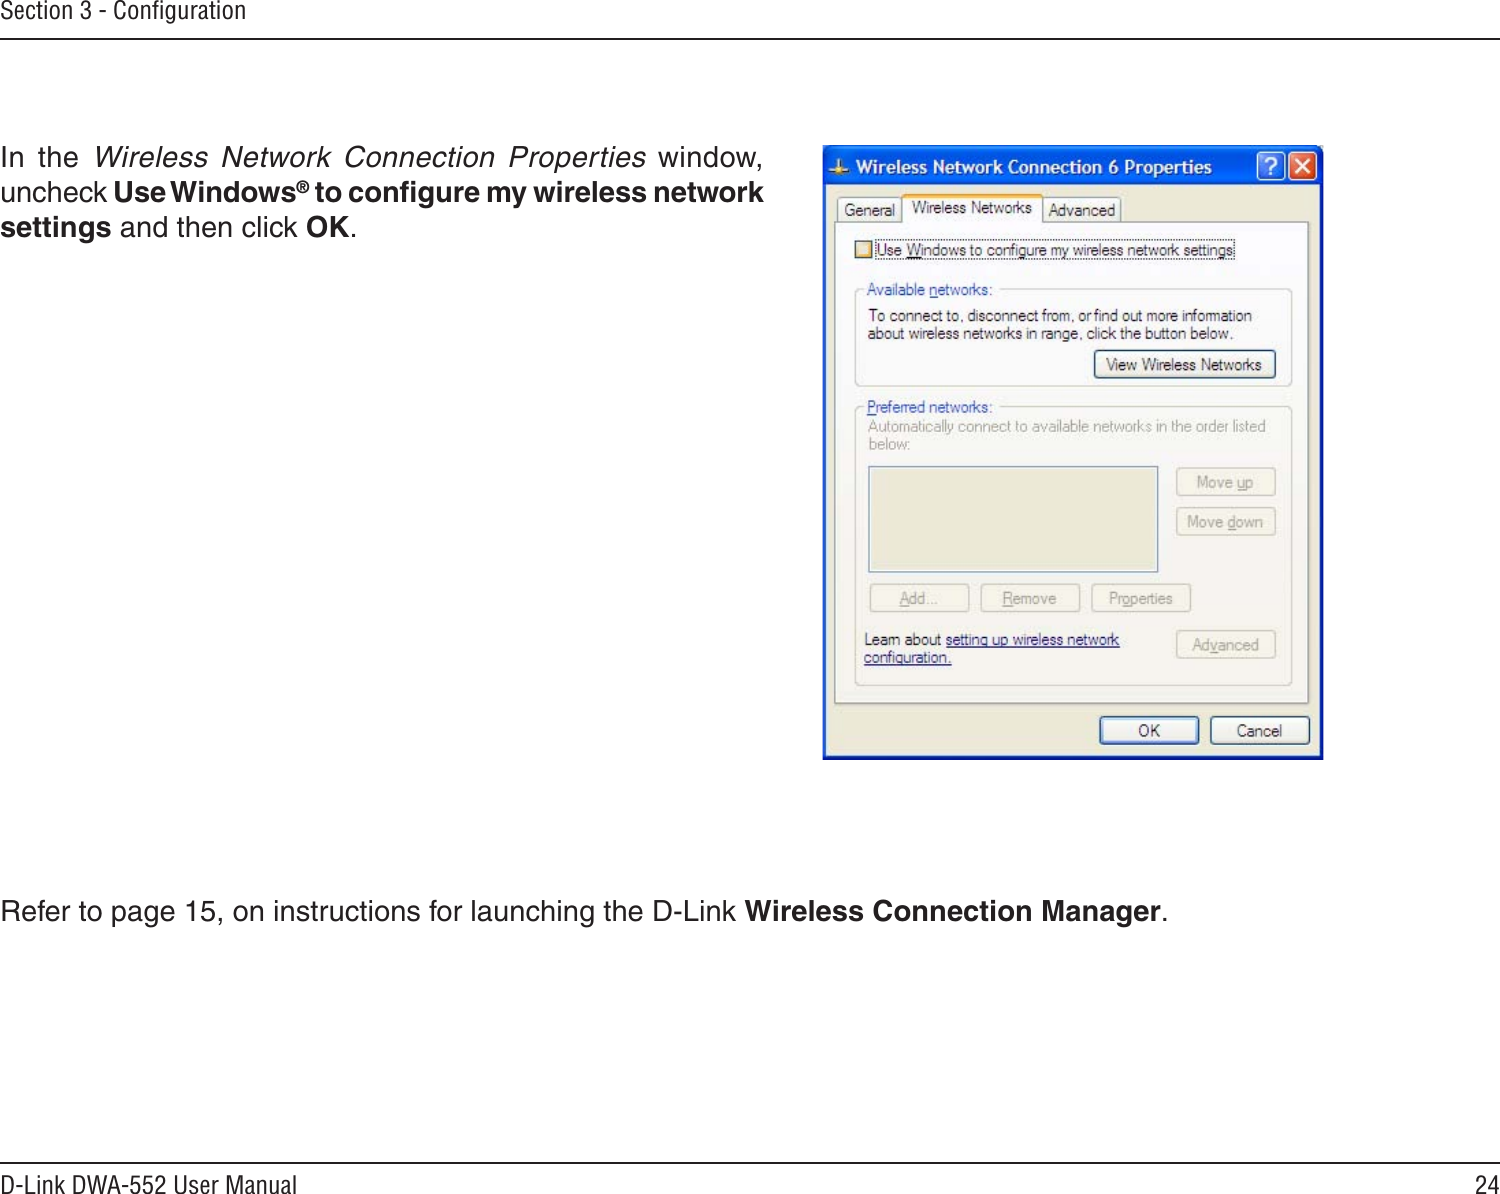 24D-Link DWA-552 User ManualSection 3 - ConﬁgurationIn  the  Wireless  Network  Connection  Properties  window, uncheck Use Windows® to conﬁgure my wireless network settings and then click OK.Refer to page 15, on instructions for launching the D-Link Wireless Connection Manager. 